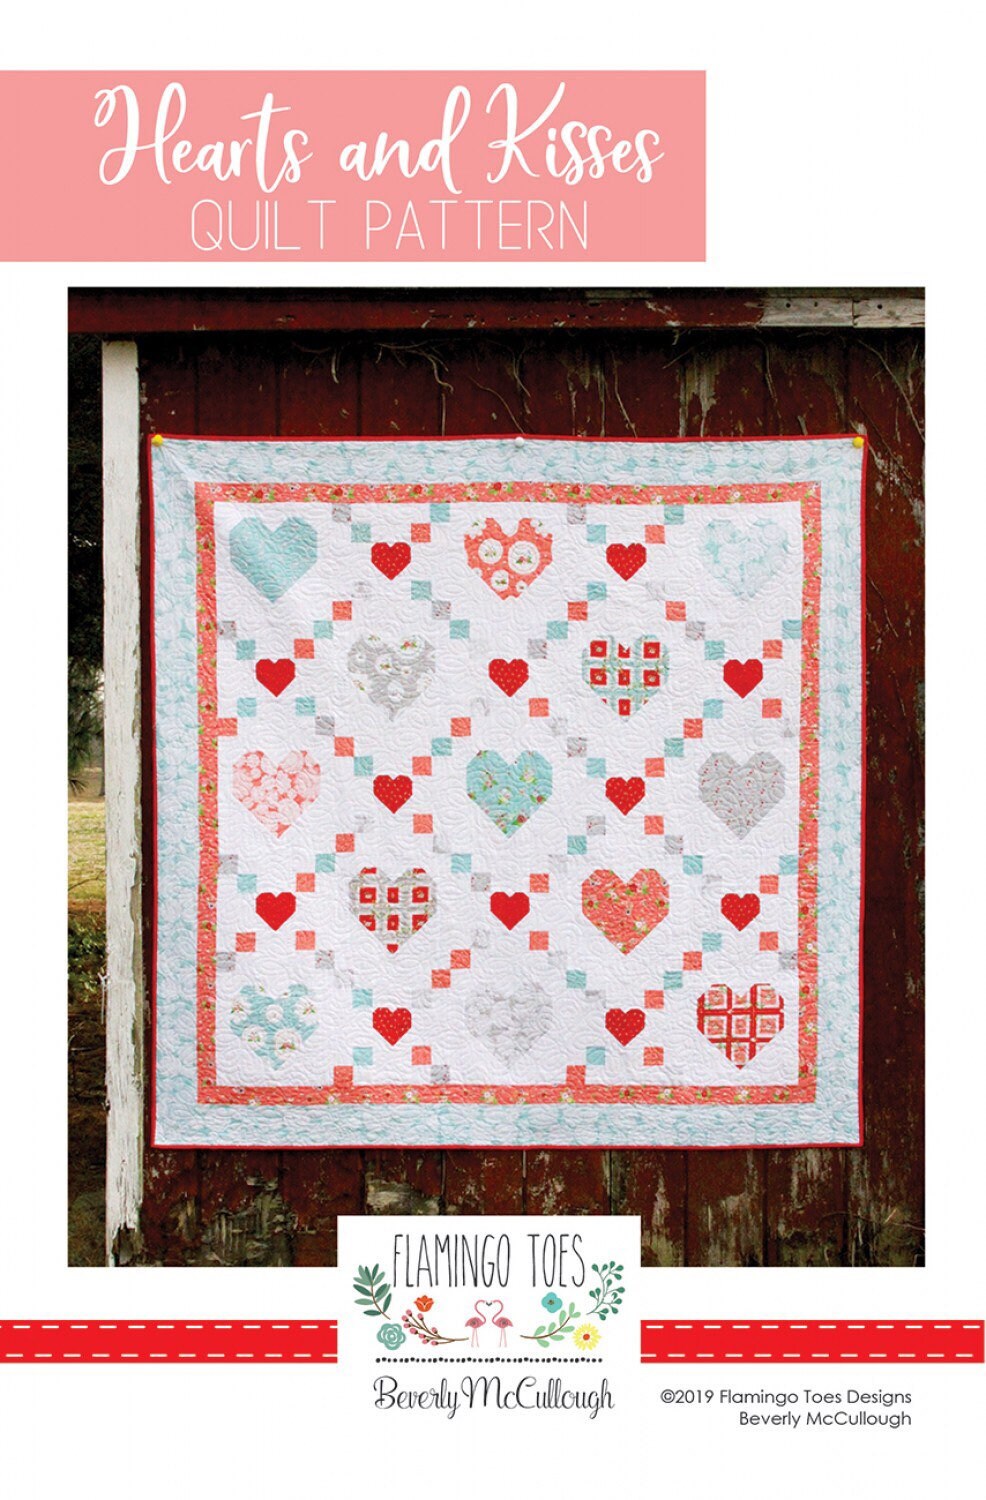 Hearts and Kisses Quilt Pattern - Flamingo Toes - Beverly McCullough - Heart Quilt Pattern - Valentines Quilt Pattern - Layer Cake Friendly